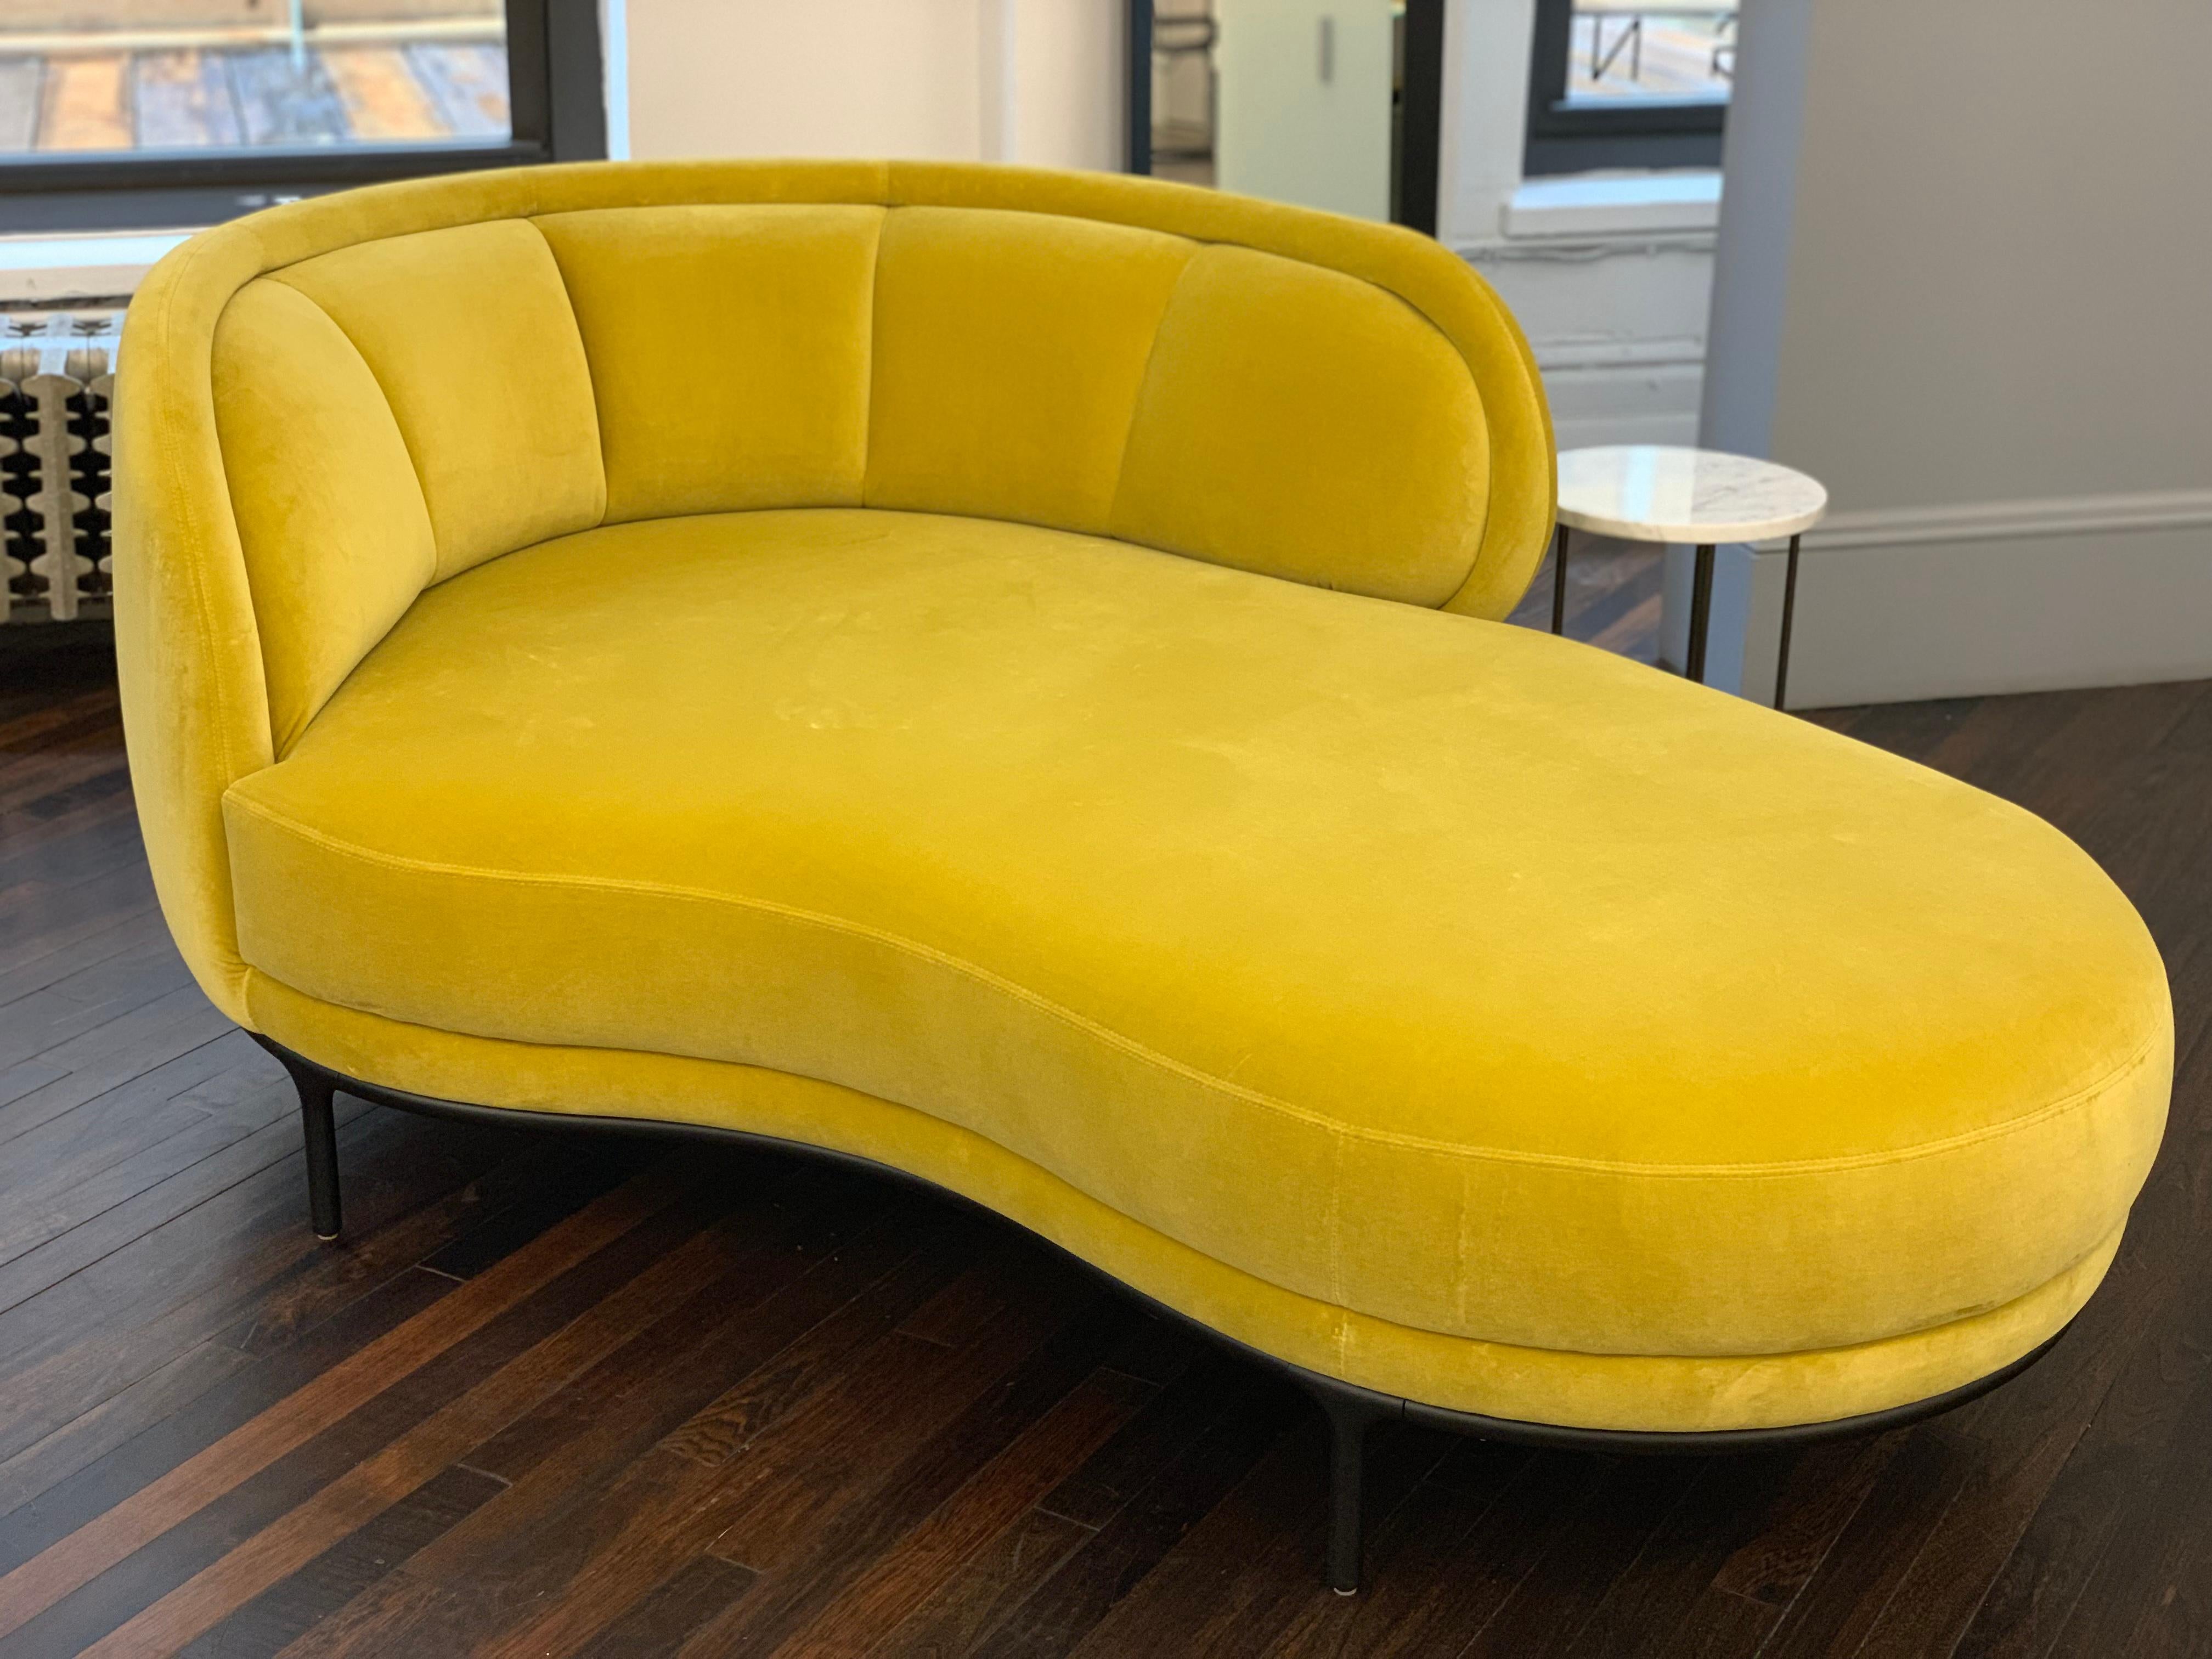 Wittmann Yellow Vuelta chaise
Vuelta Chaiselongue 19
: right
: Velvet gold (CUT)
: Black grey powder coated legs
My private island: a Classic free-standing chaise loungeis always something of a private retreat, even when it is part of a larger